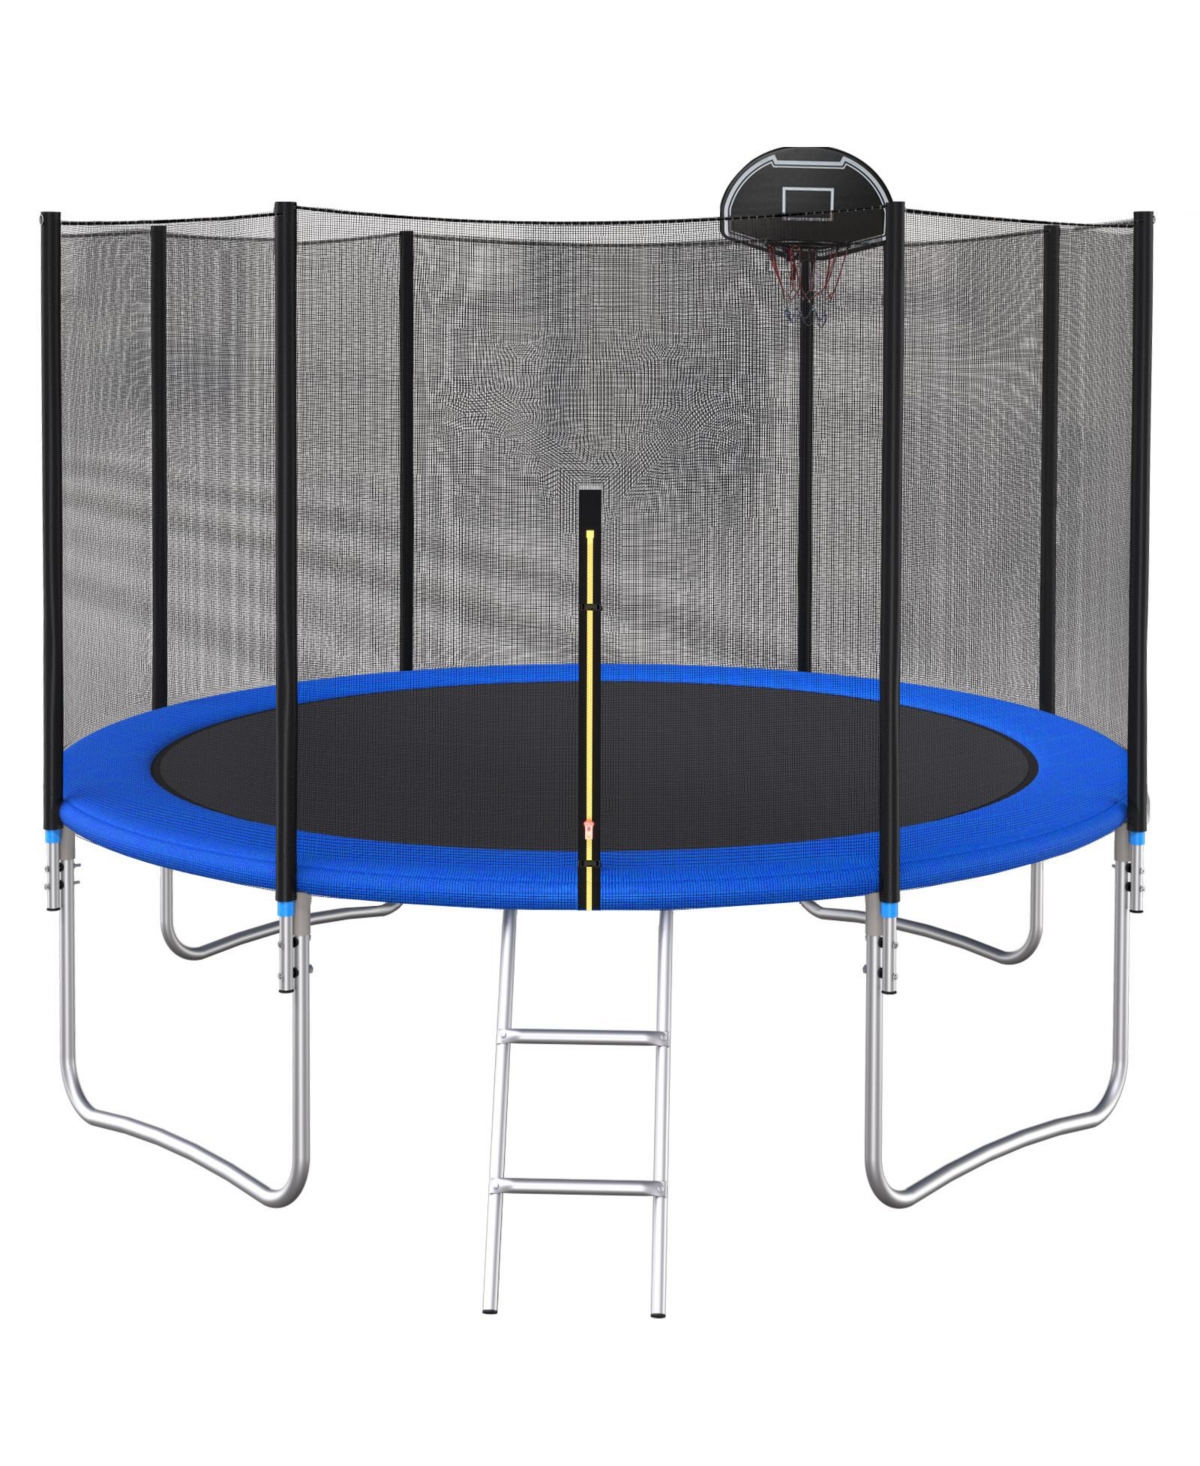 10 Ft Trampoline Outside Safety Net With Basketball Hoop - Blue